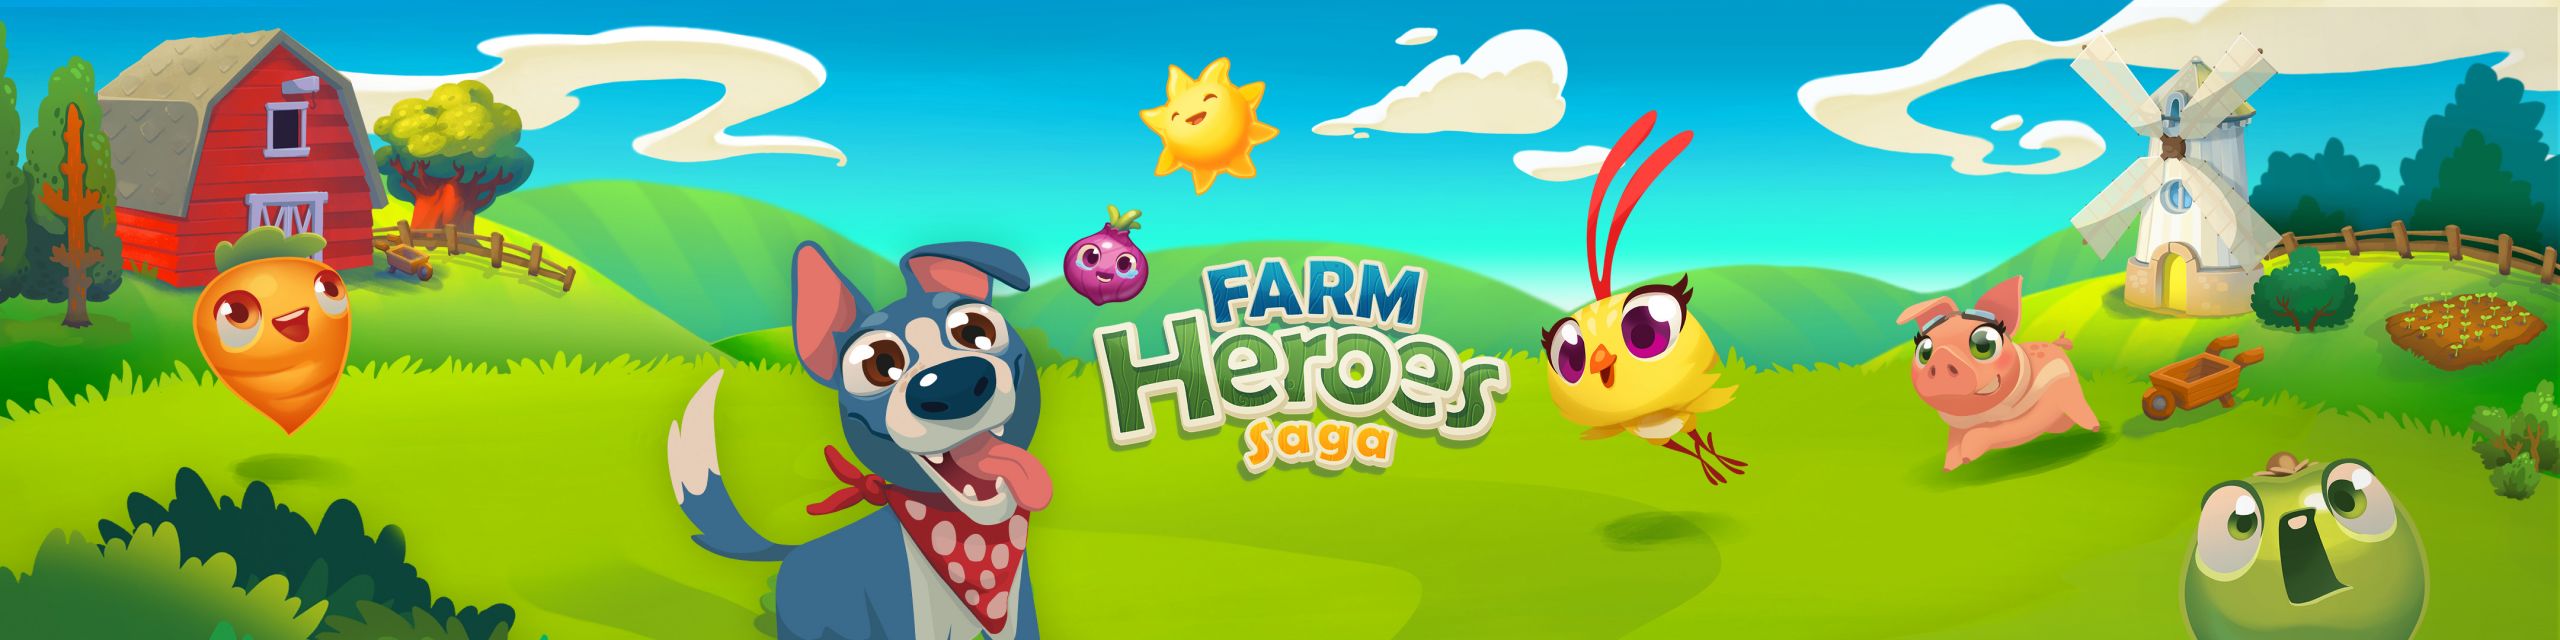 Farm Animals Projects for Kids